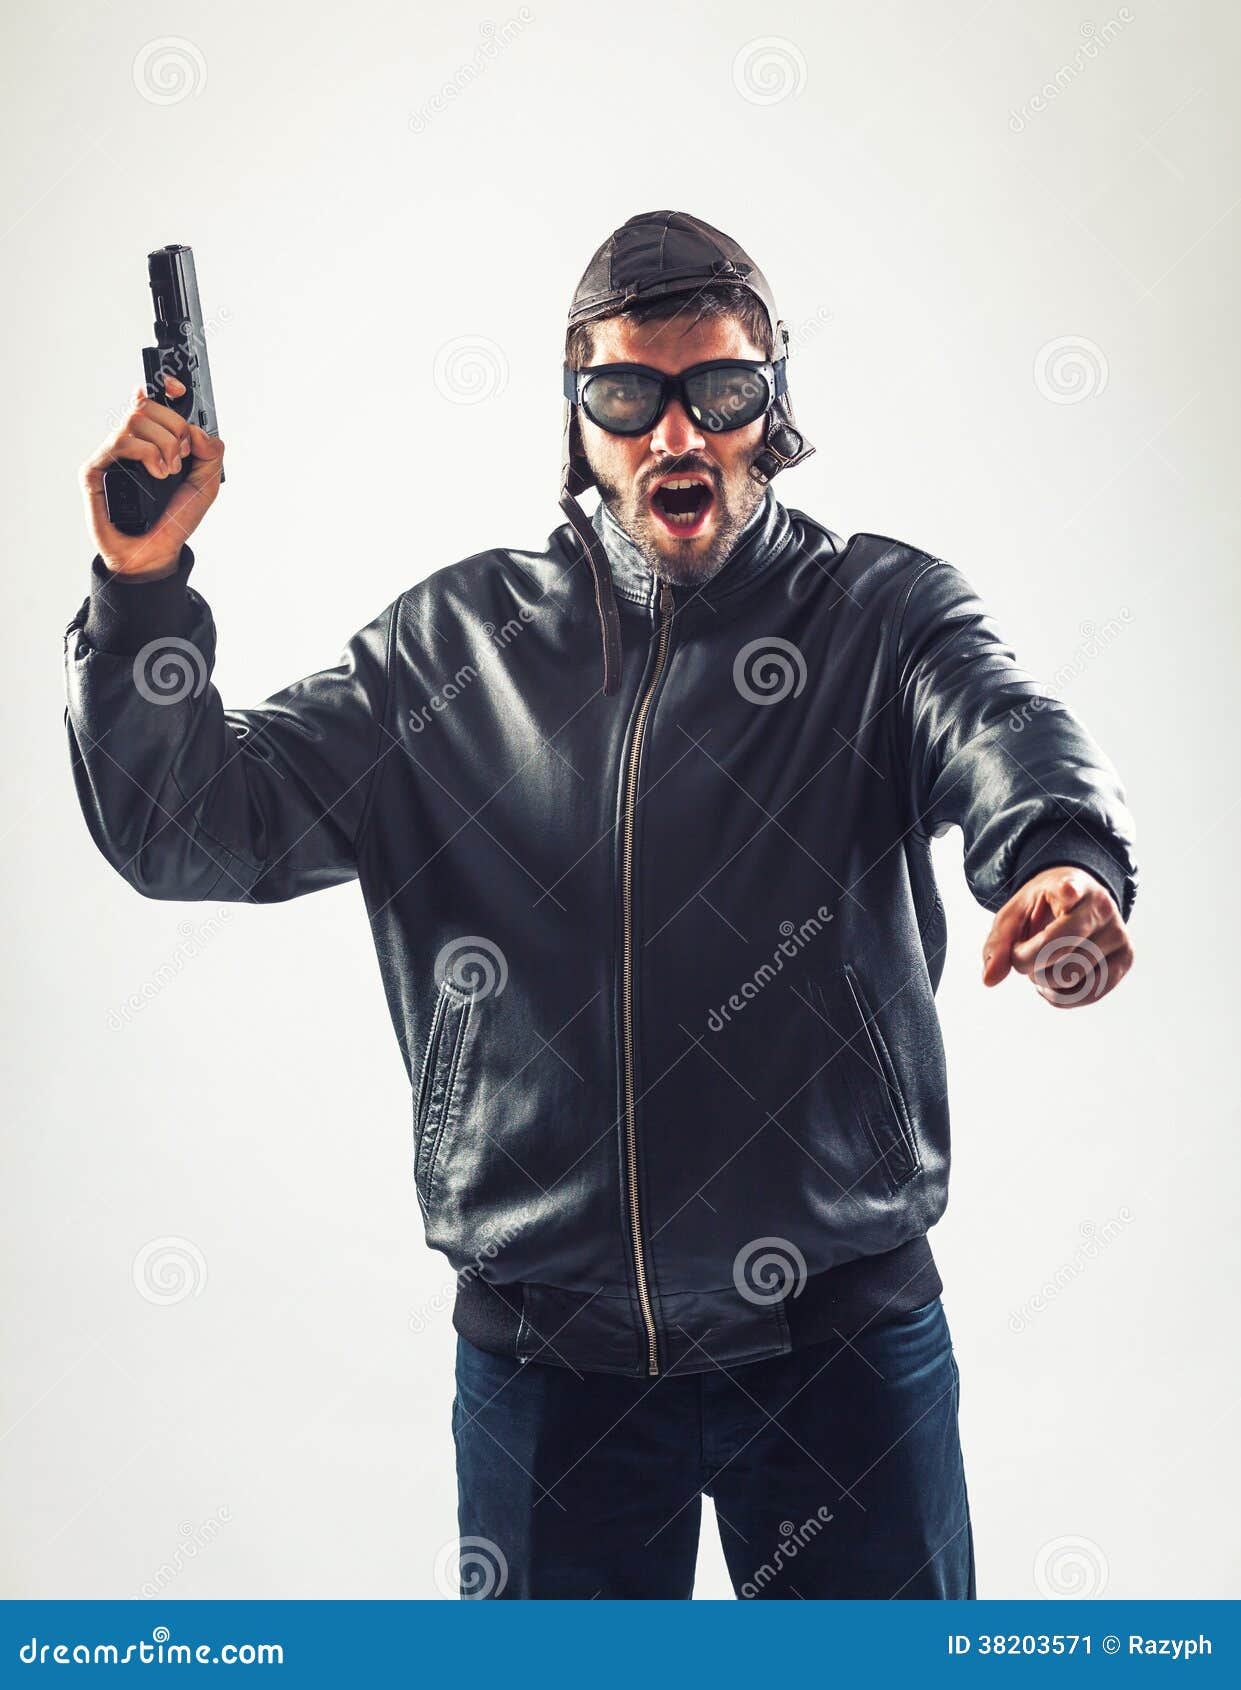 disguised angry man holding a gun threatening